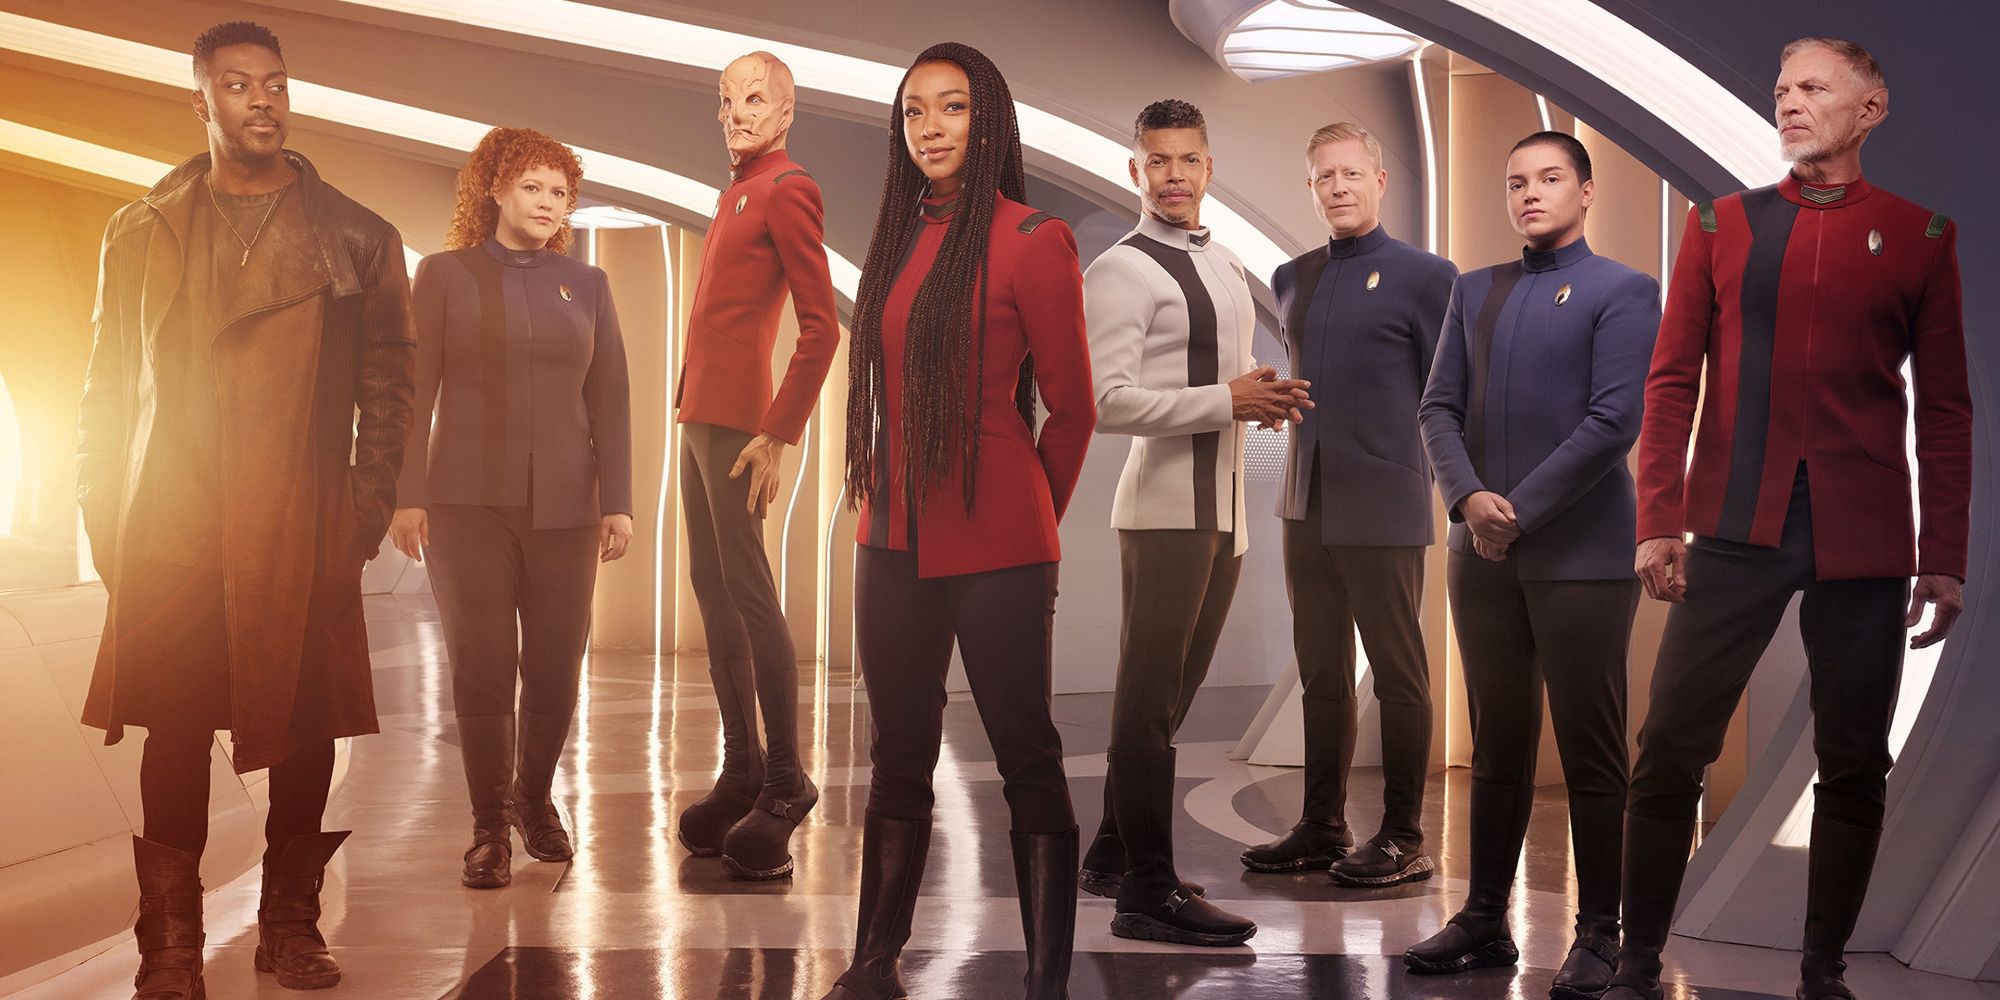 "We Would All Do It": Discovery Season 5 Star Says Cast Would Do Star Trek Crossovers